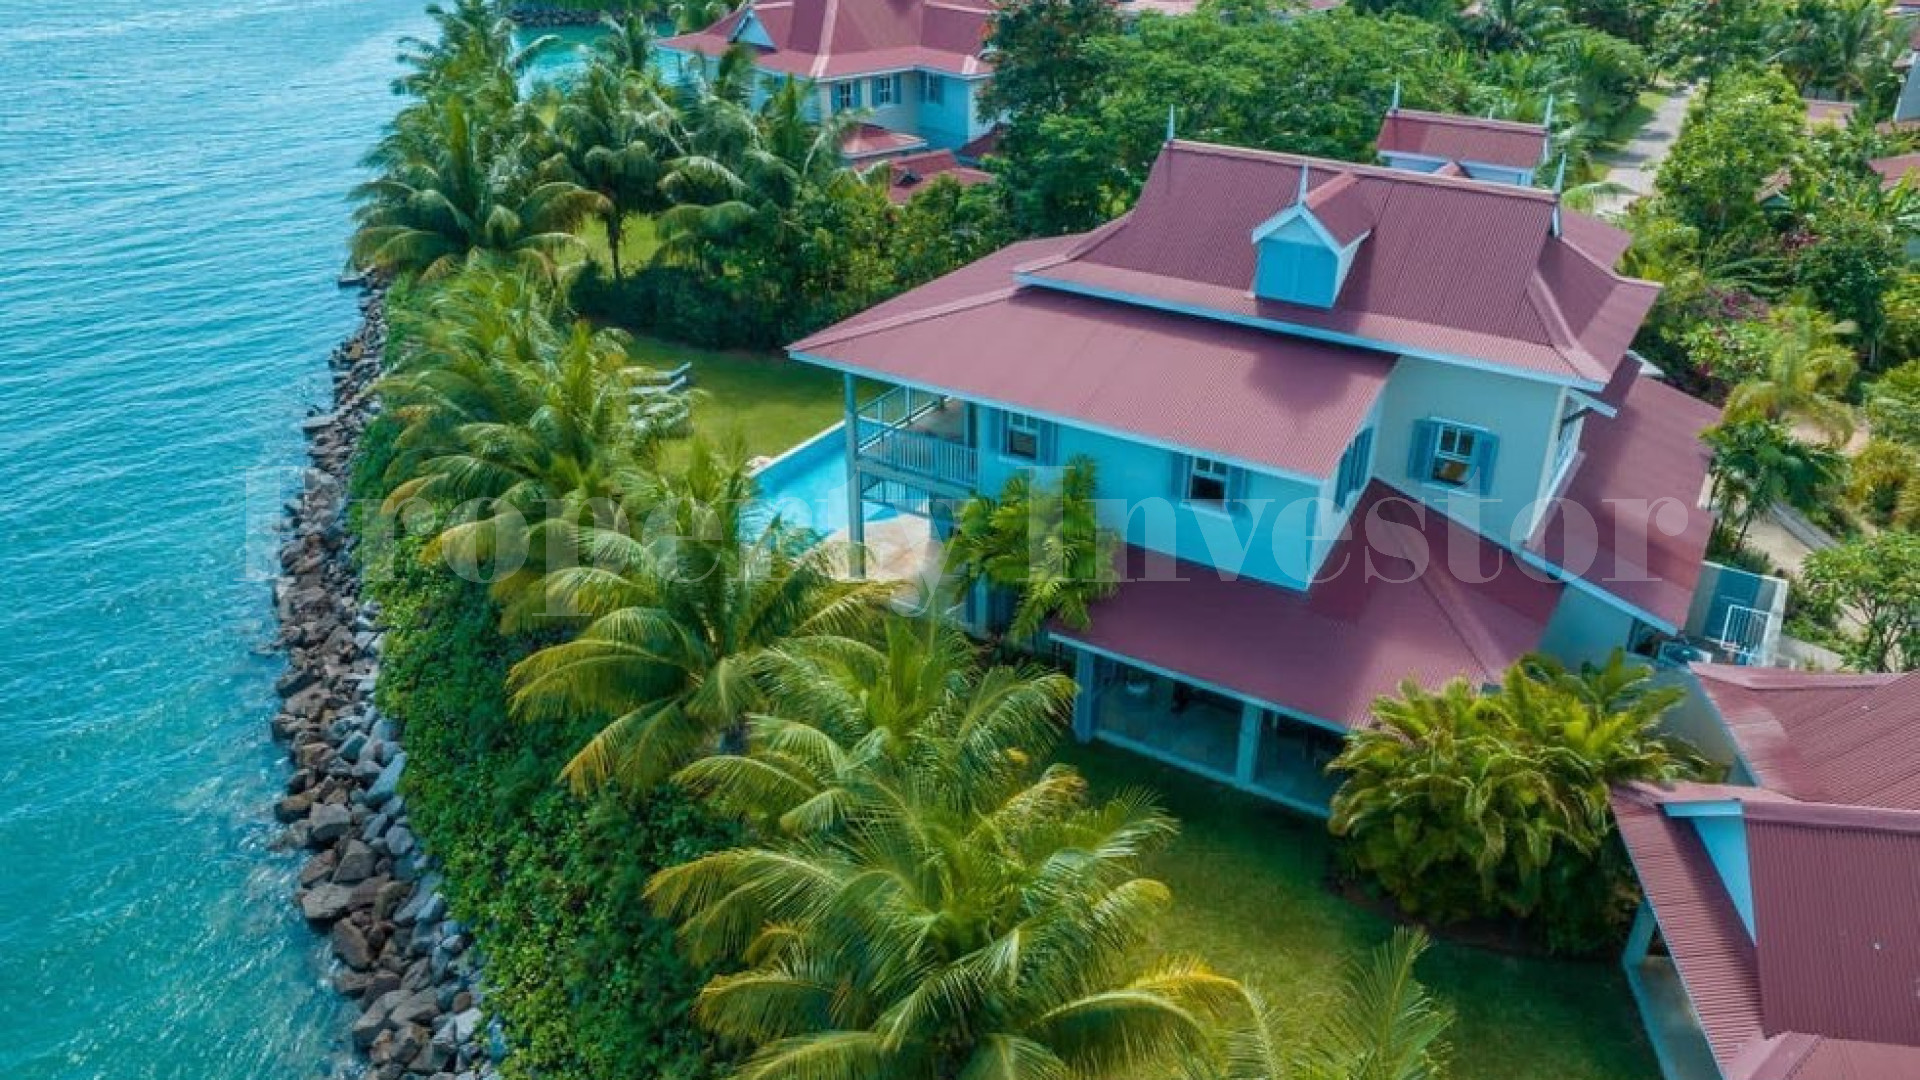 One-Of-A-Kind 8 Bedroom (6+2) Luxury Villa with Private Guest Cottage for Sale on Eden Island, Seychelles